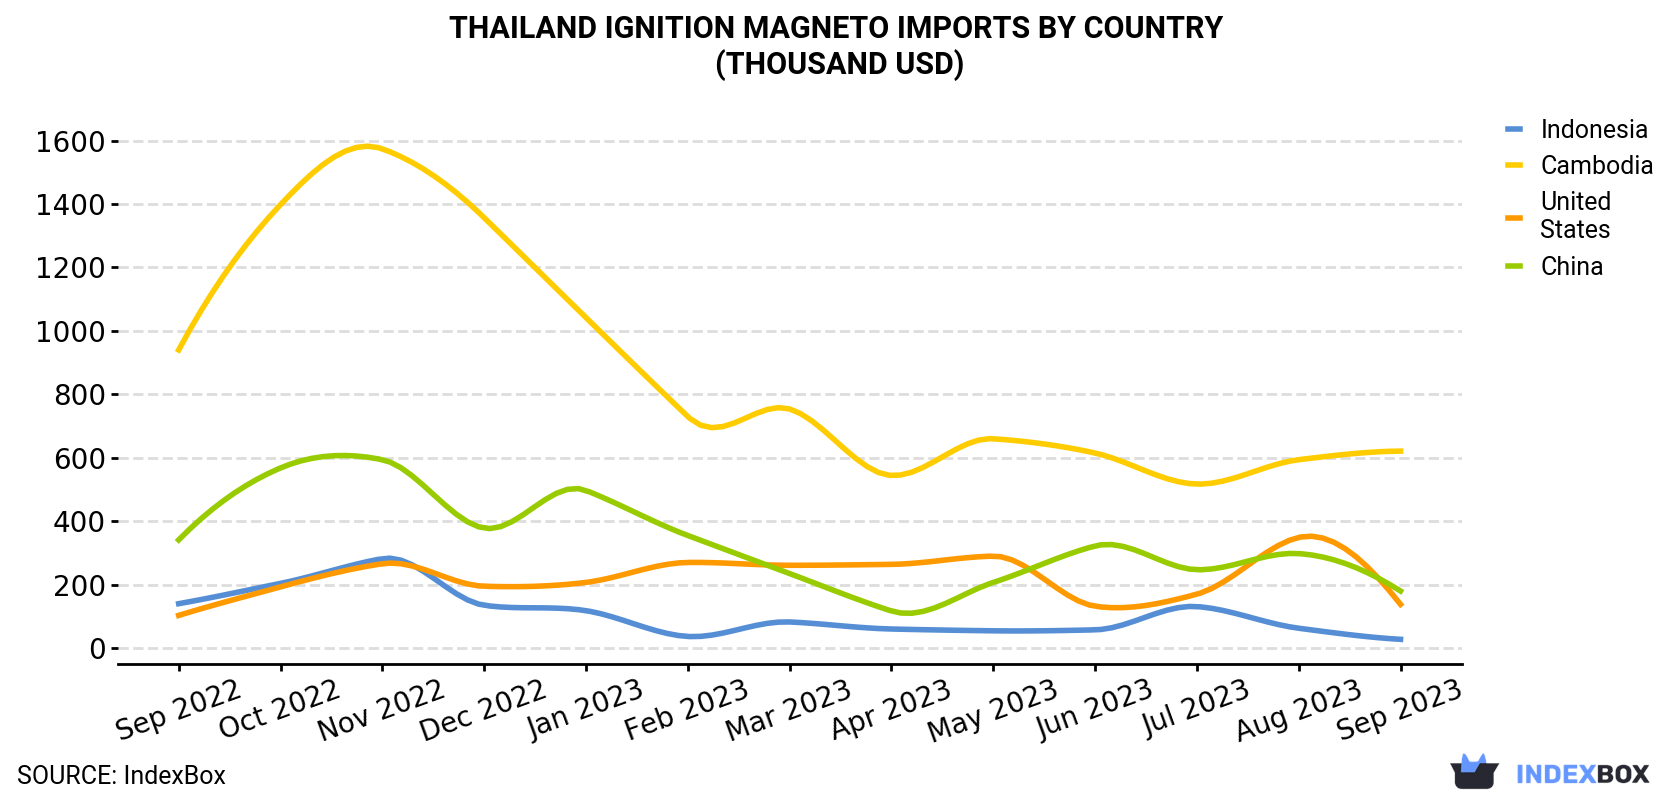 Thailand Ignition Magneto Imports By Country (Thousand USD)